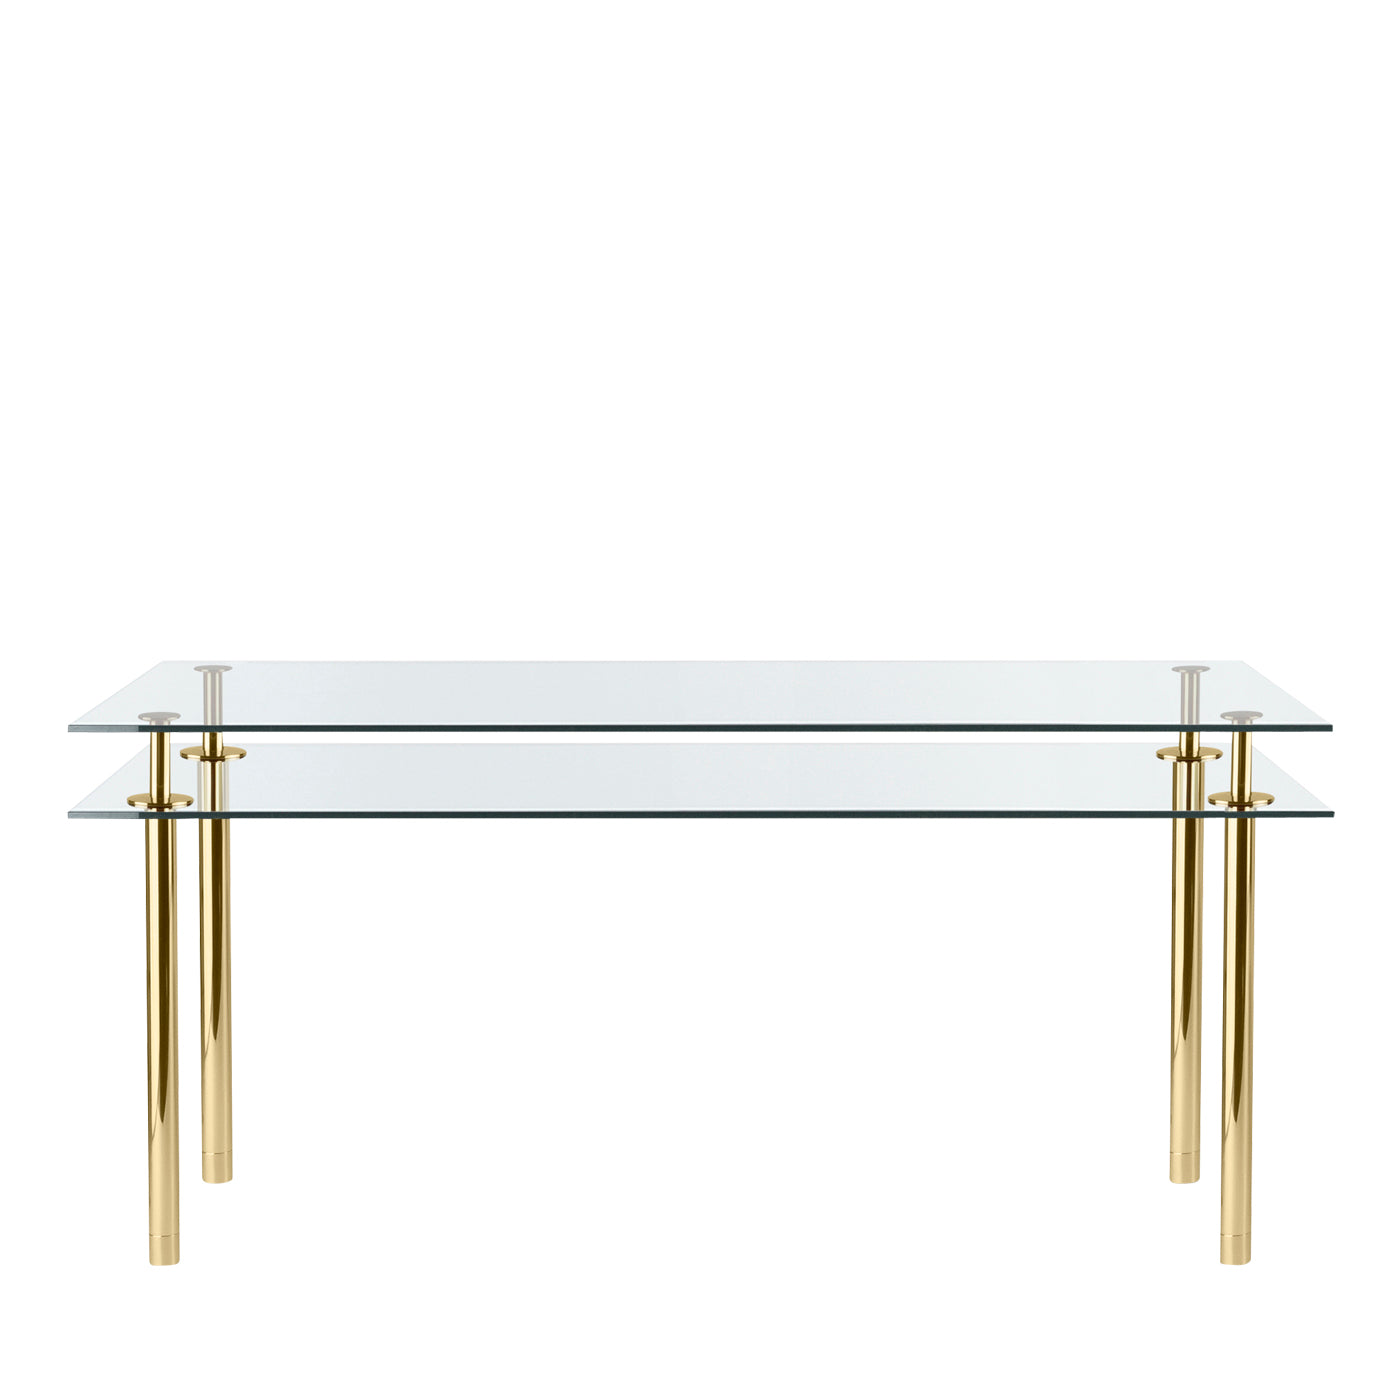 Legs Medium Rectangular Table in Crystal and Polished Brass By Paolo Rizzato - Main view